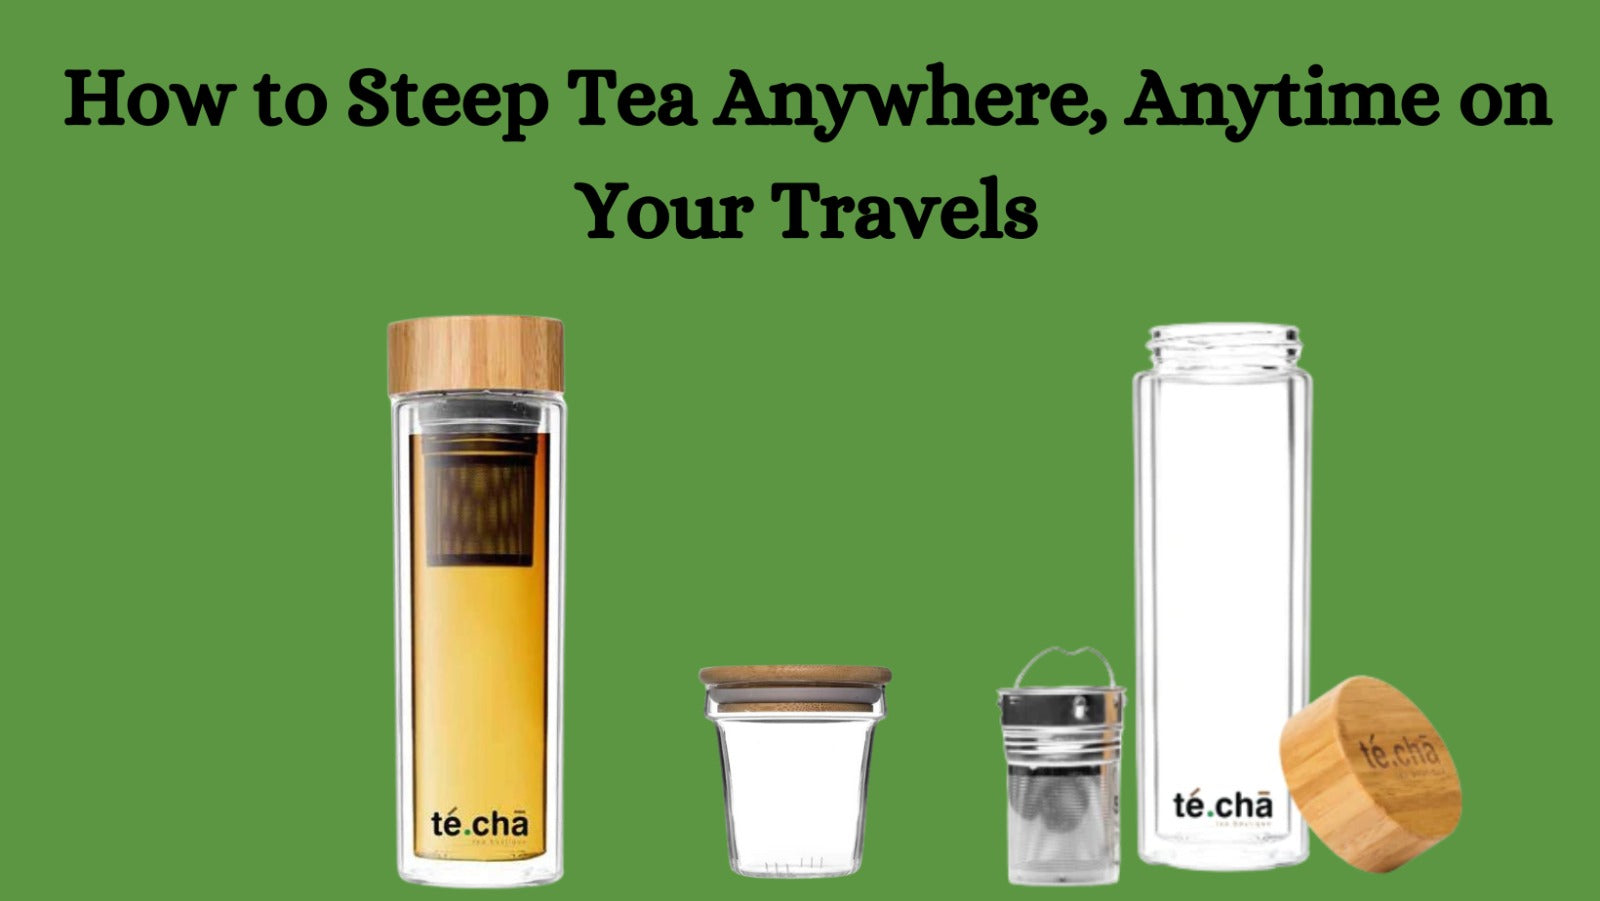 How to Steep Tea Anywhere, Anytime on Your Travels